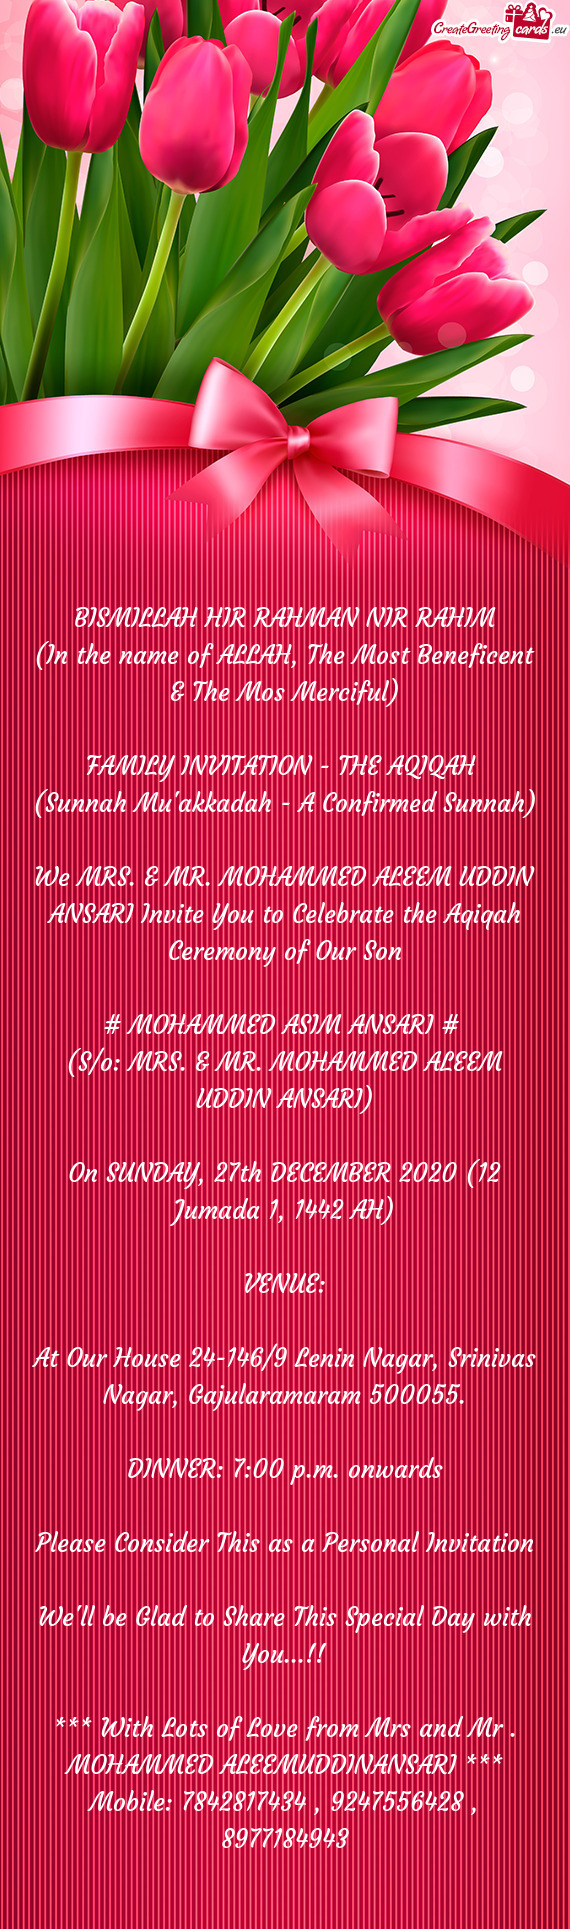 We MRS. & MR. MOHAMMED ALEEM UDDIN ANSARI Invite You to Celebrate the Aqiqah Ceremony of Our Son